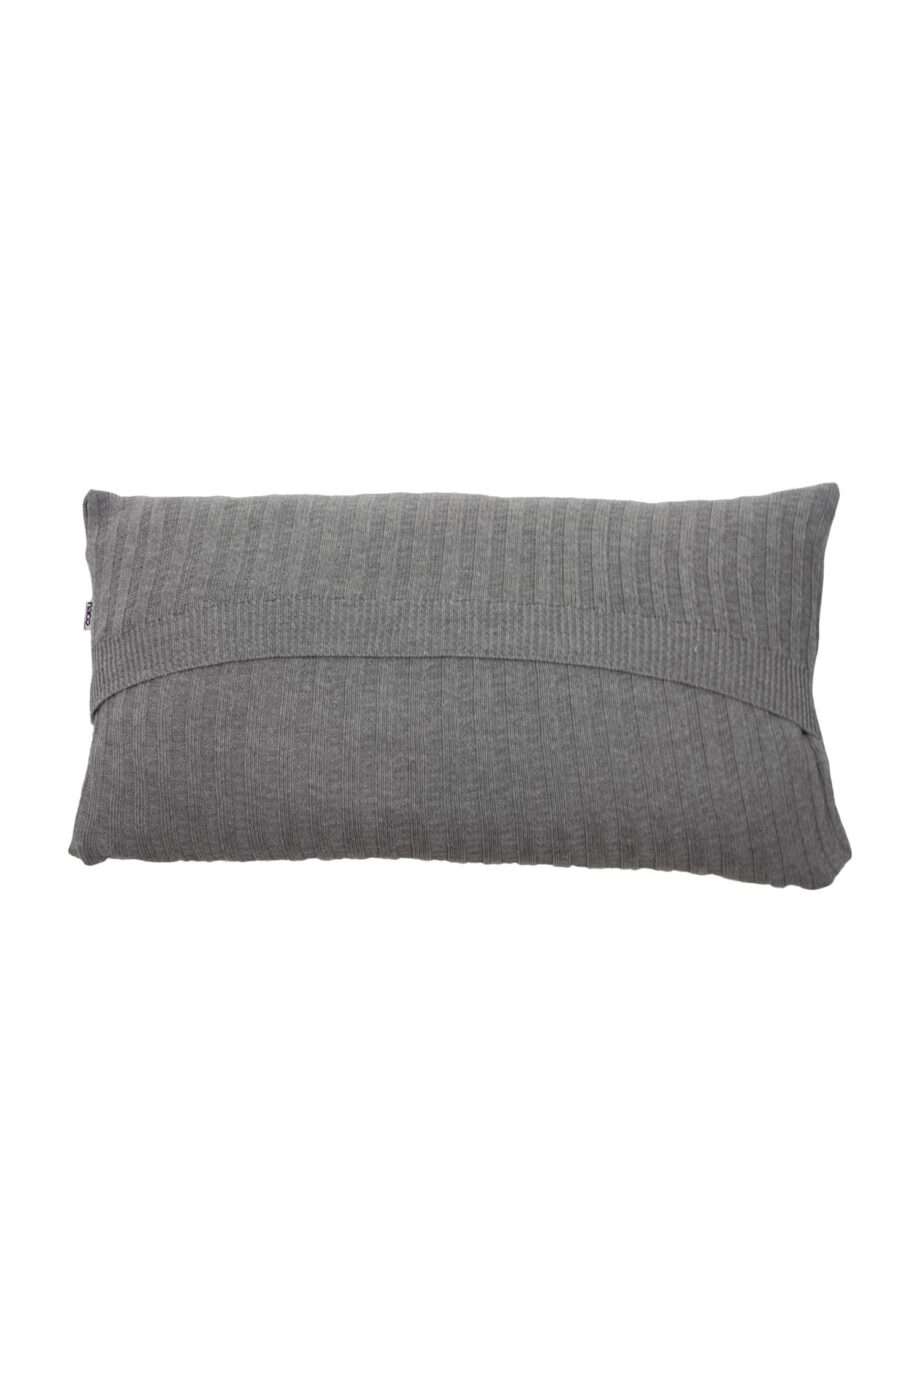 ribs small light grey knitted cotton pillowcase small